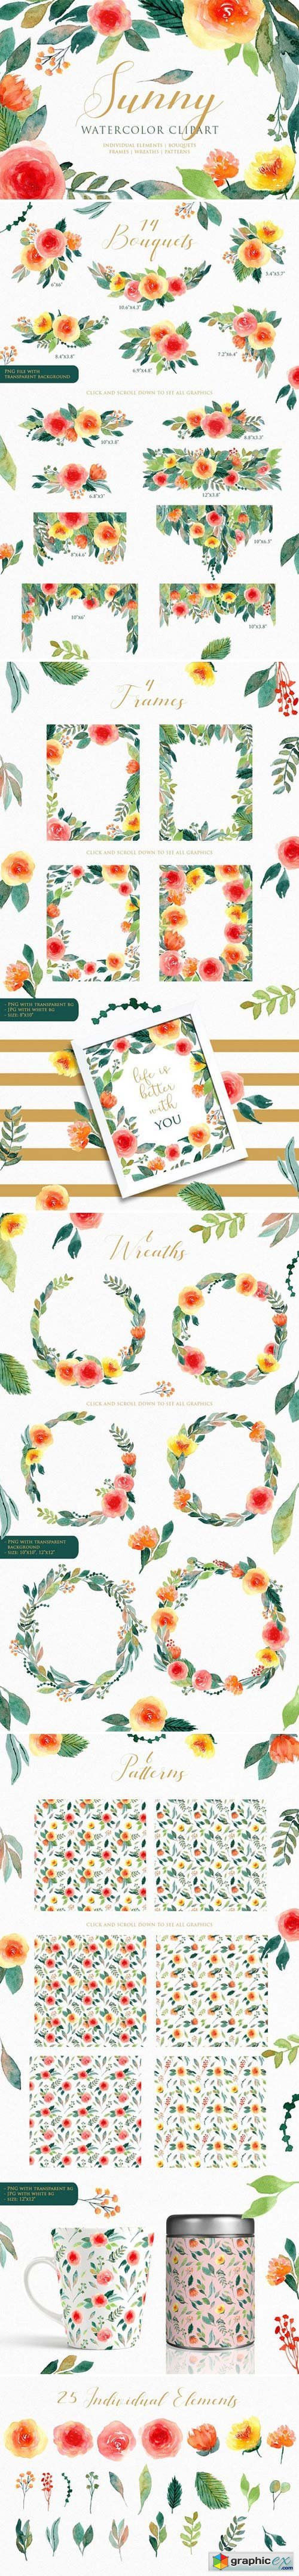 Sunny - Watercolor Floral Clipart